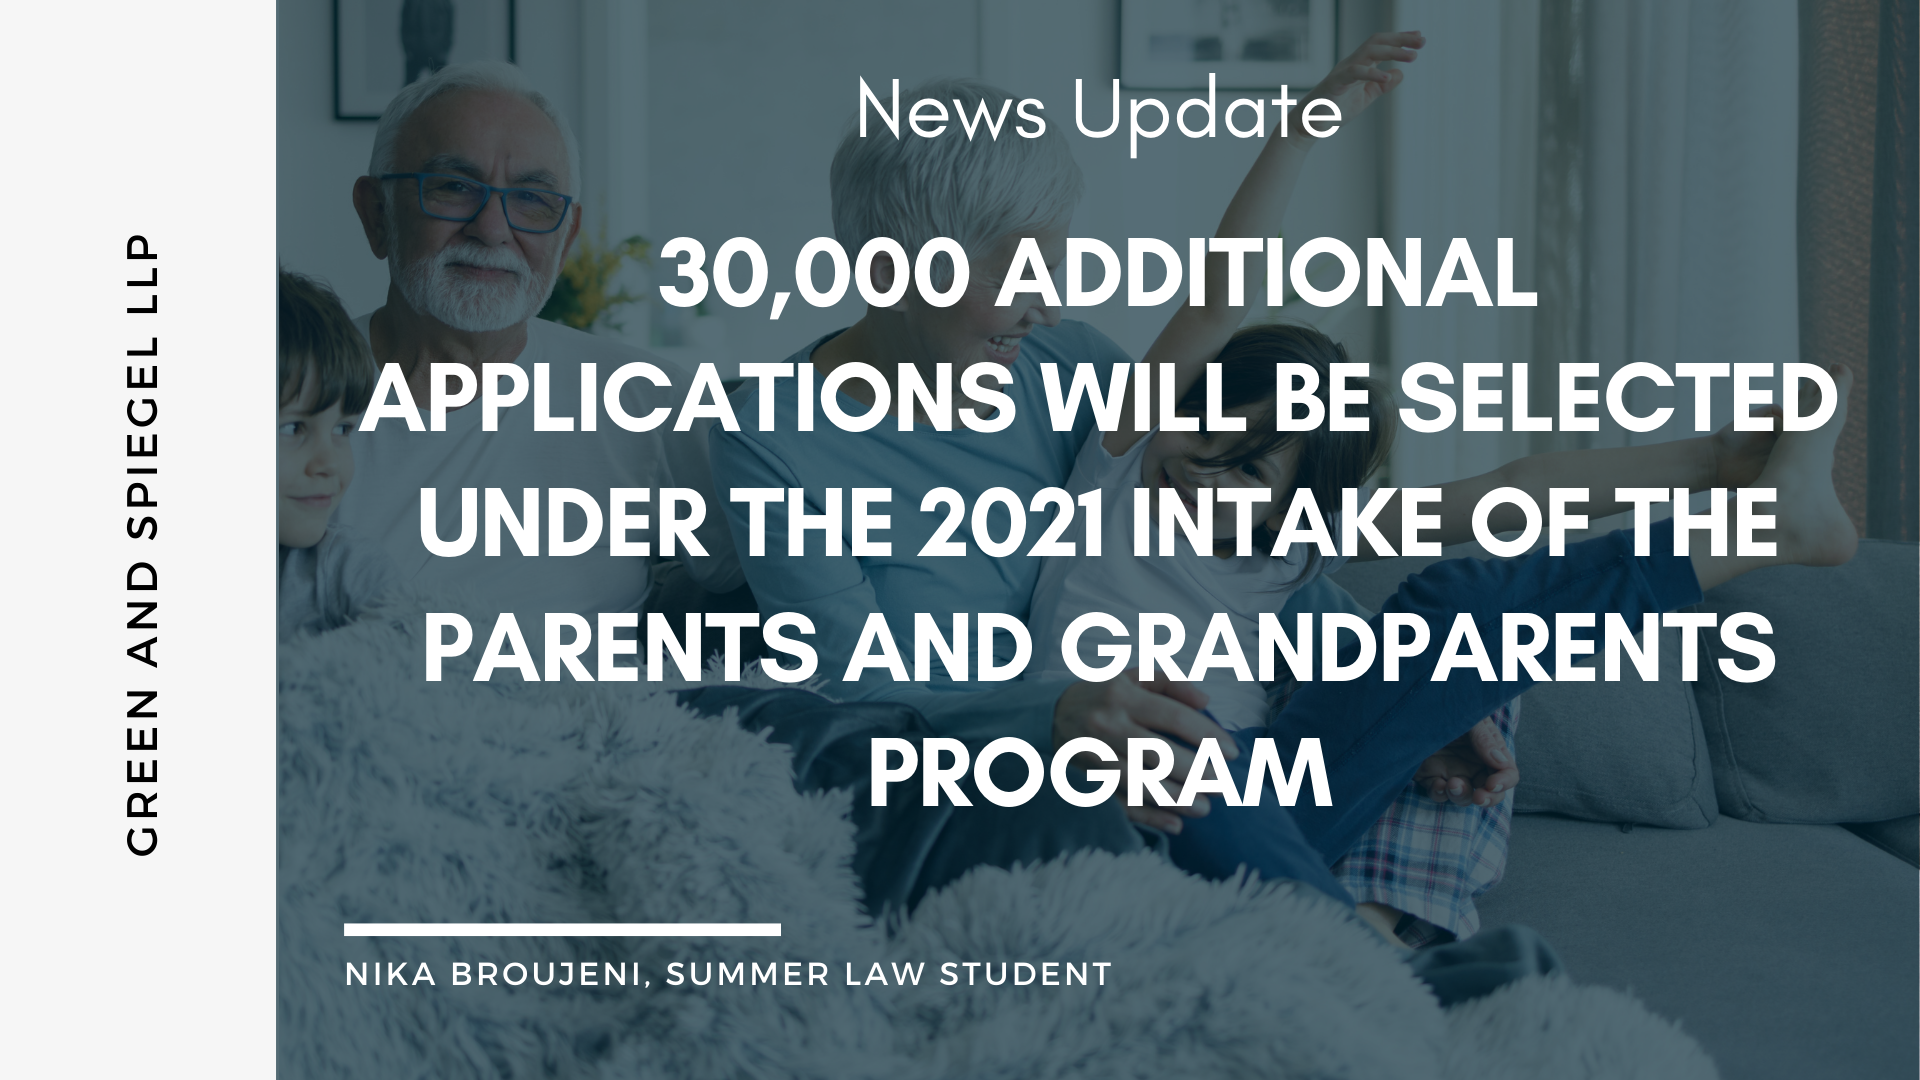 30,000 ADDITIONAL APPLICATIONS WILL BE SELECTED UNDER THE 2021 INTAKE OF THE PARENTS AND GRANDPARENTS PROGRAM